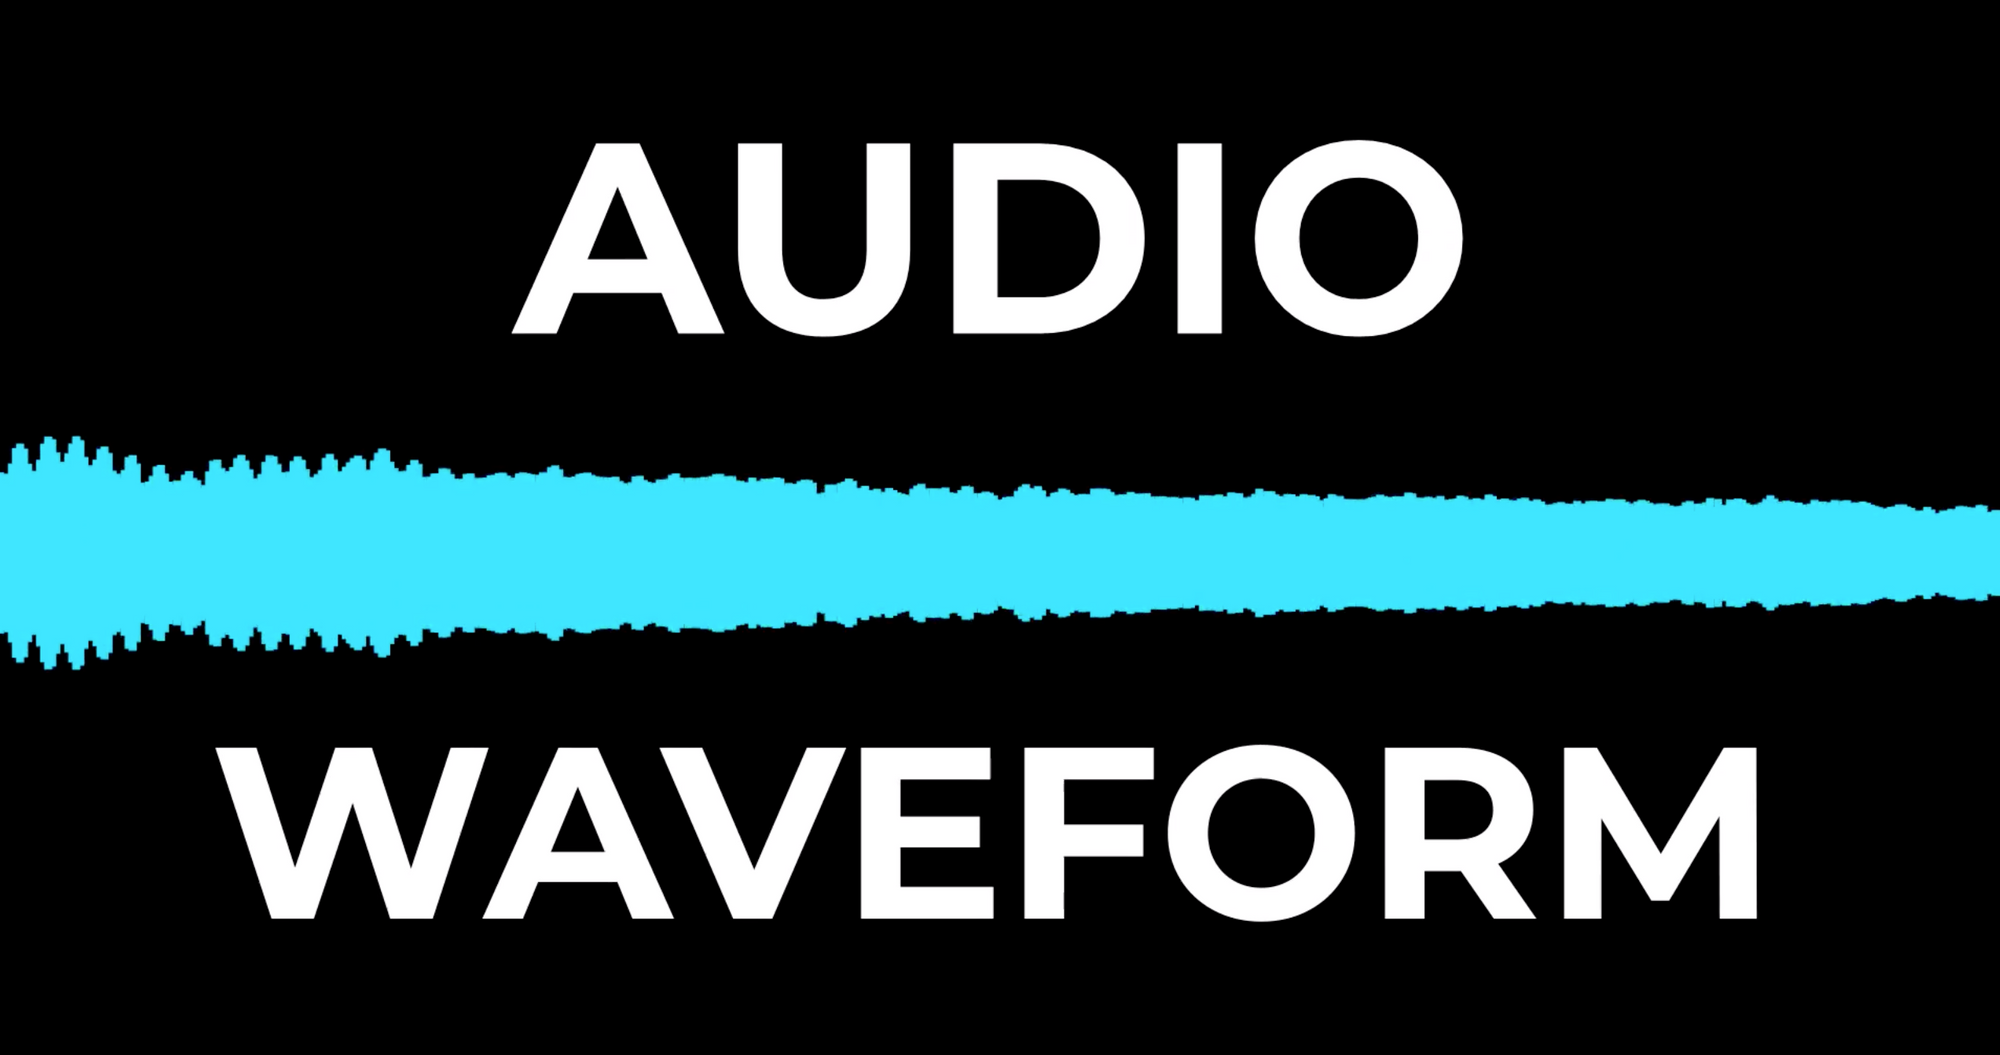 How to Make Audio Waveforms for Your Podcast